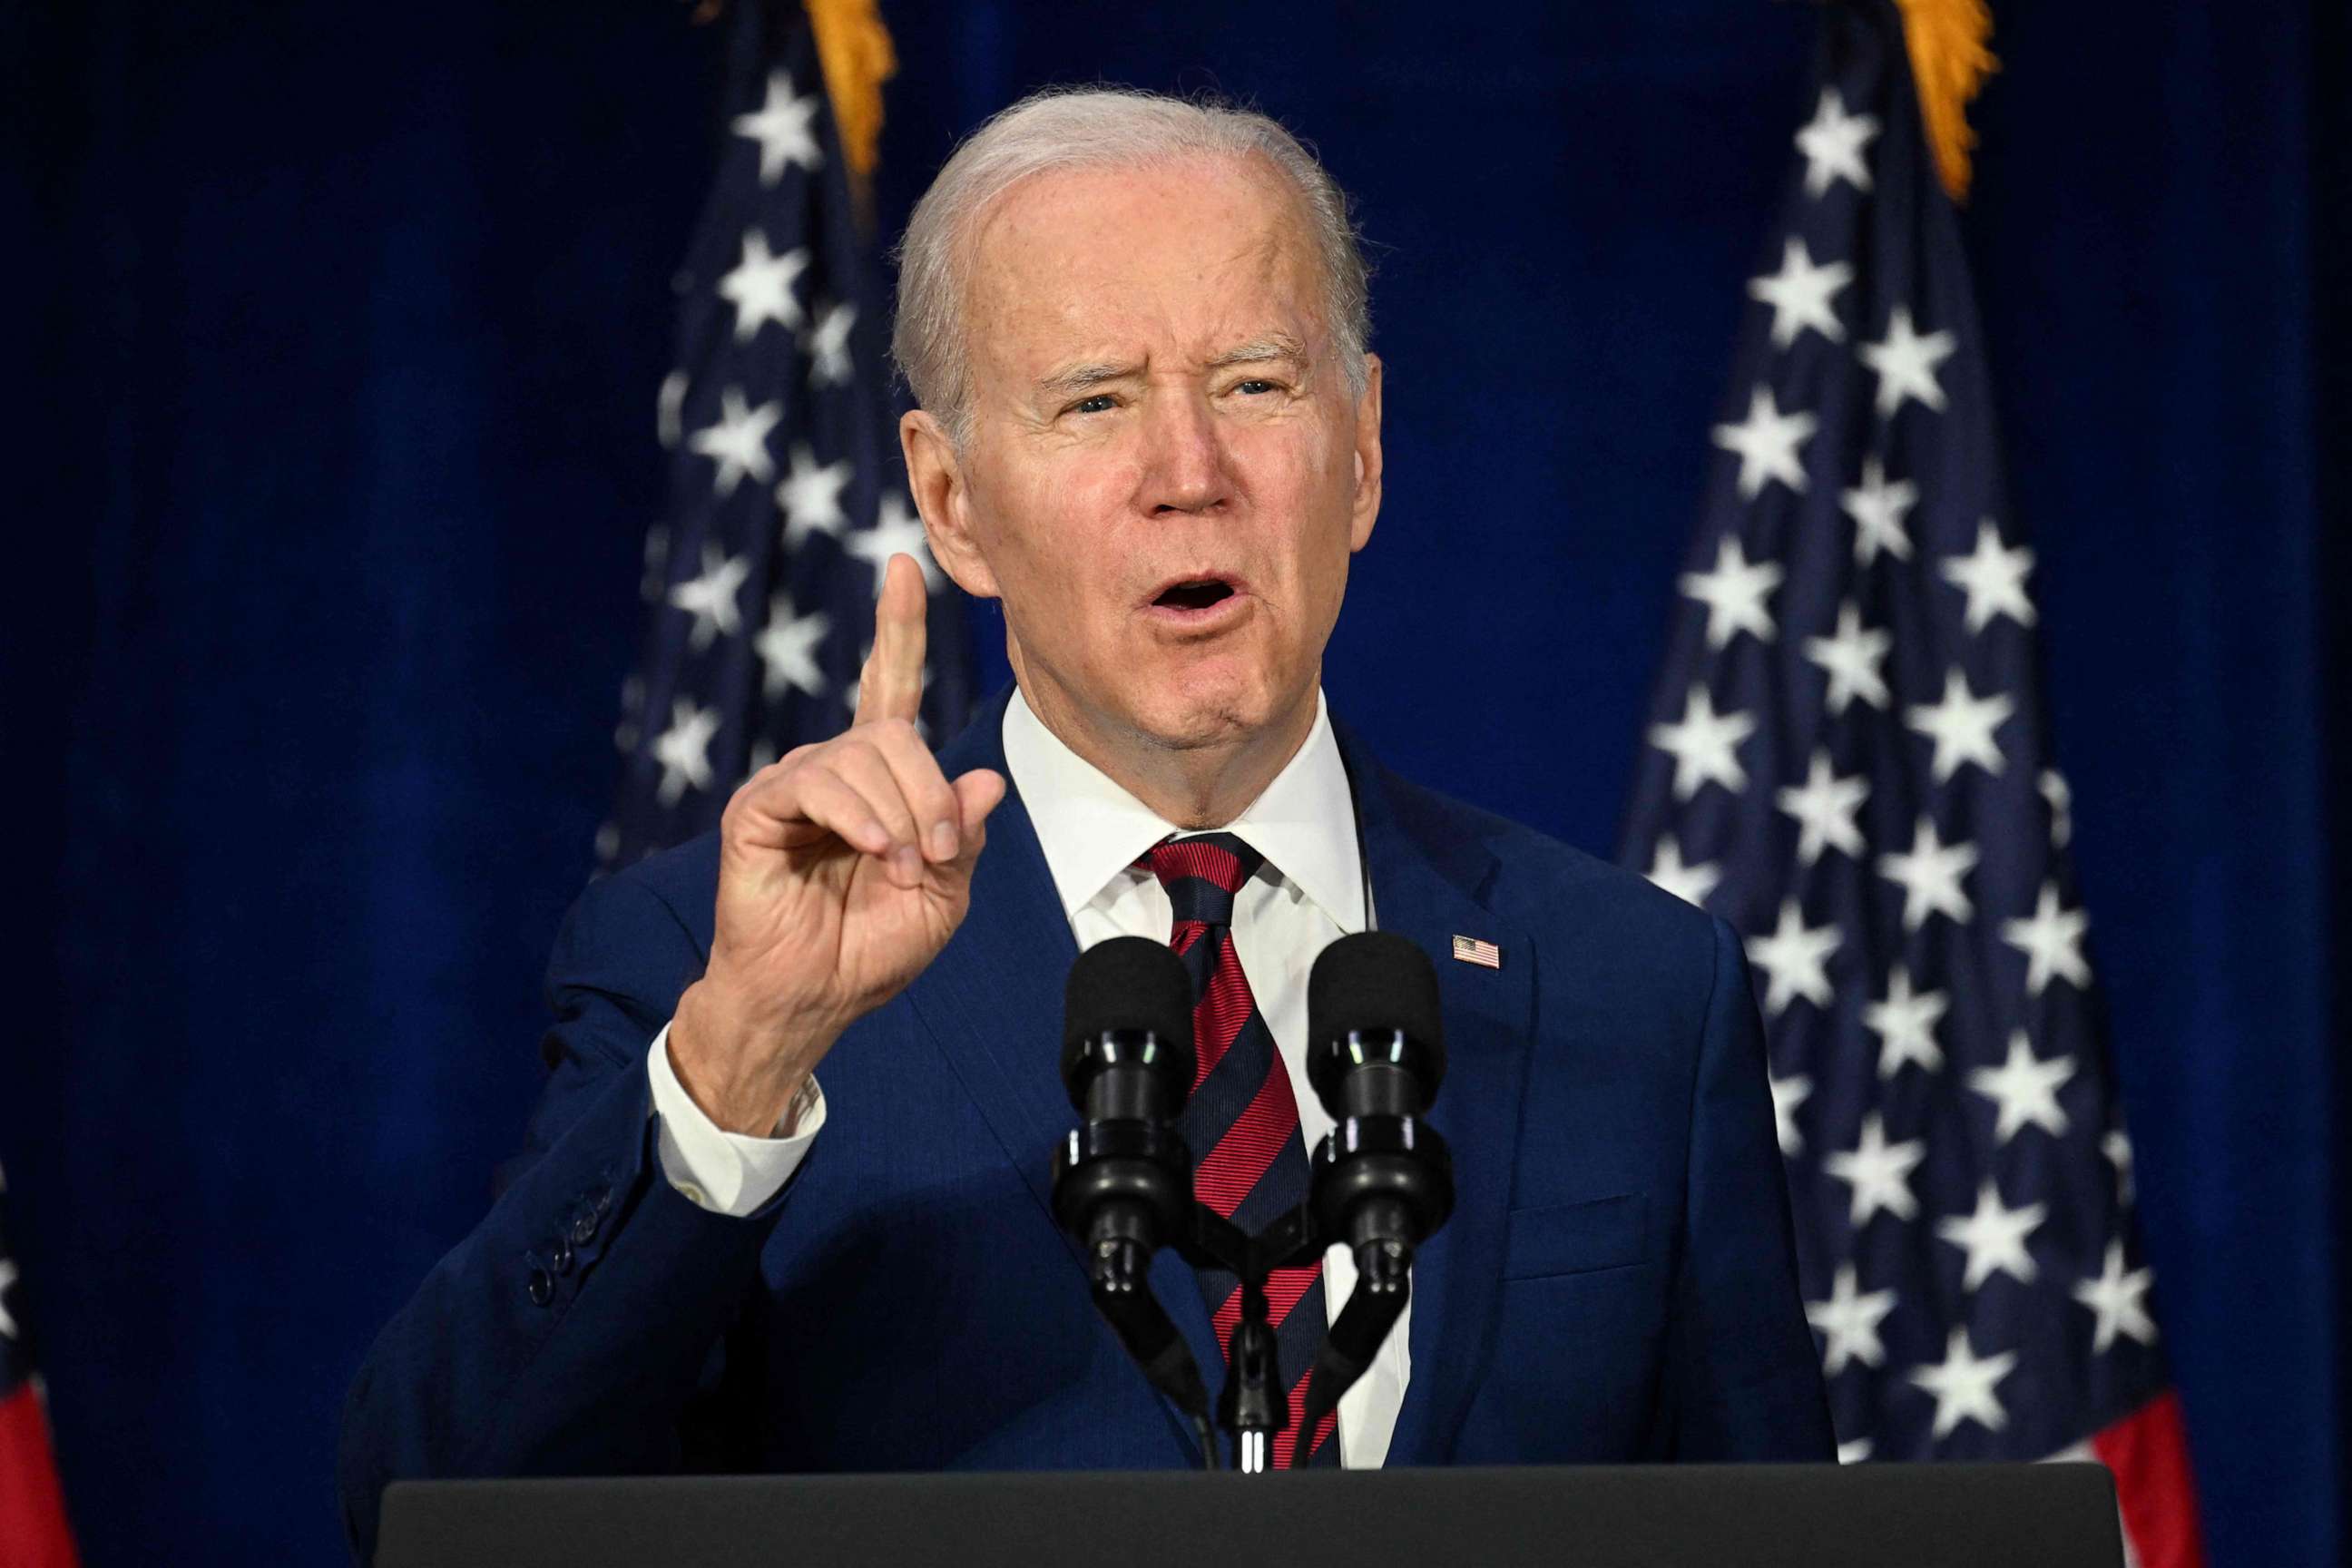 PHOTO: President Joe Biden discusses his efforts to reduce gun violence at The Boys & Girls Club of West San Gabriel Valley, in Monterey Park, Calif., on March 14, 2023.